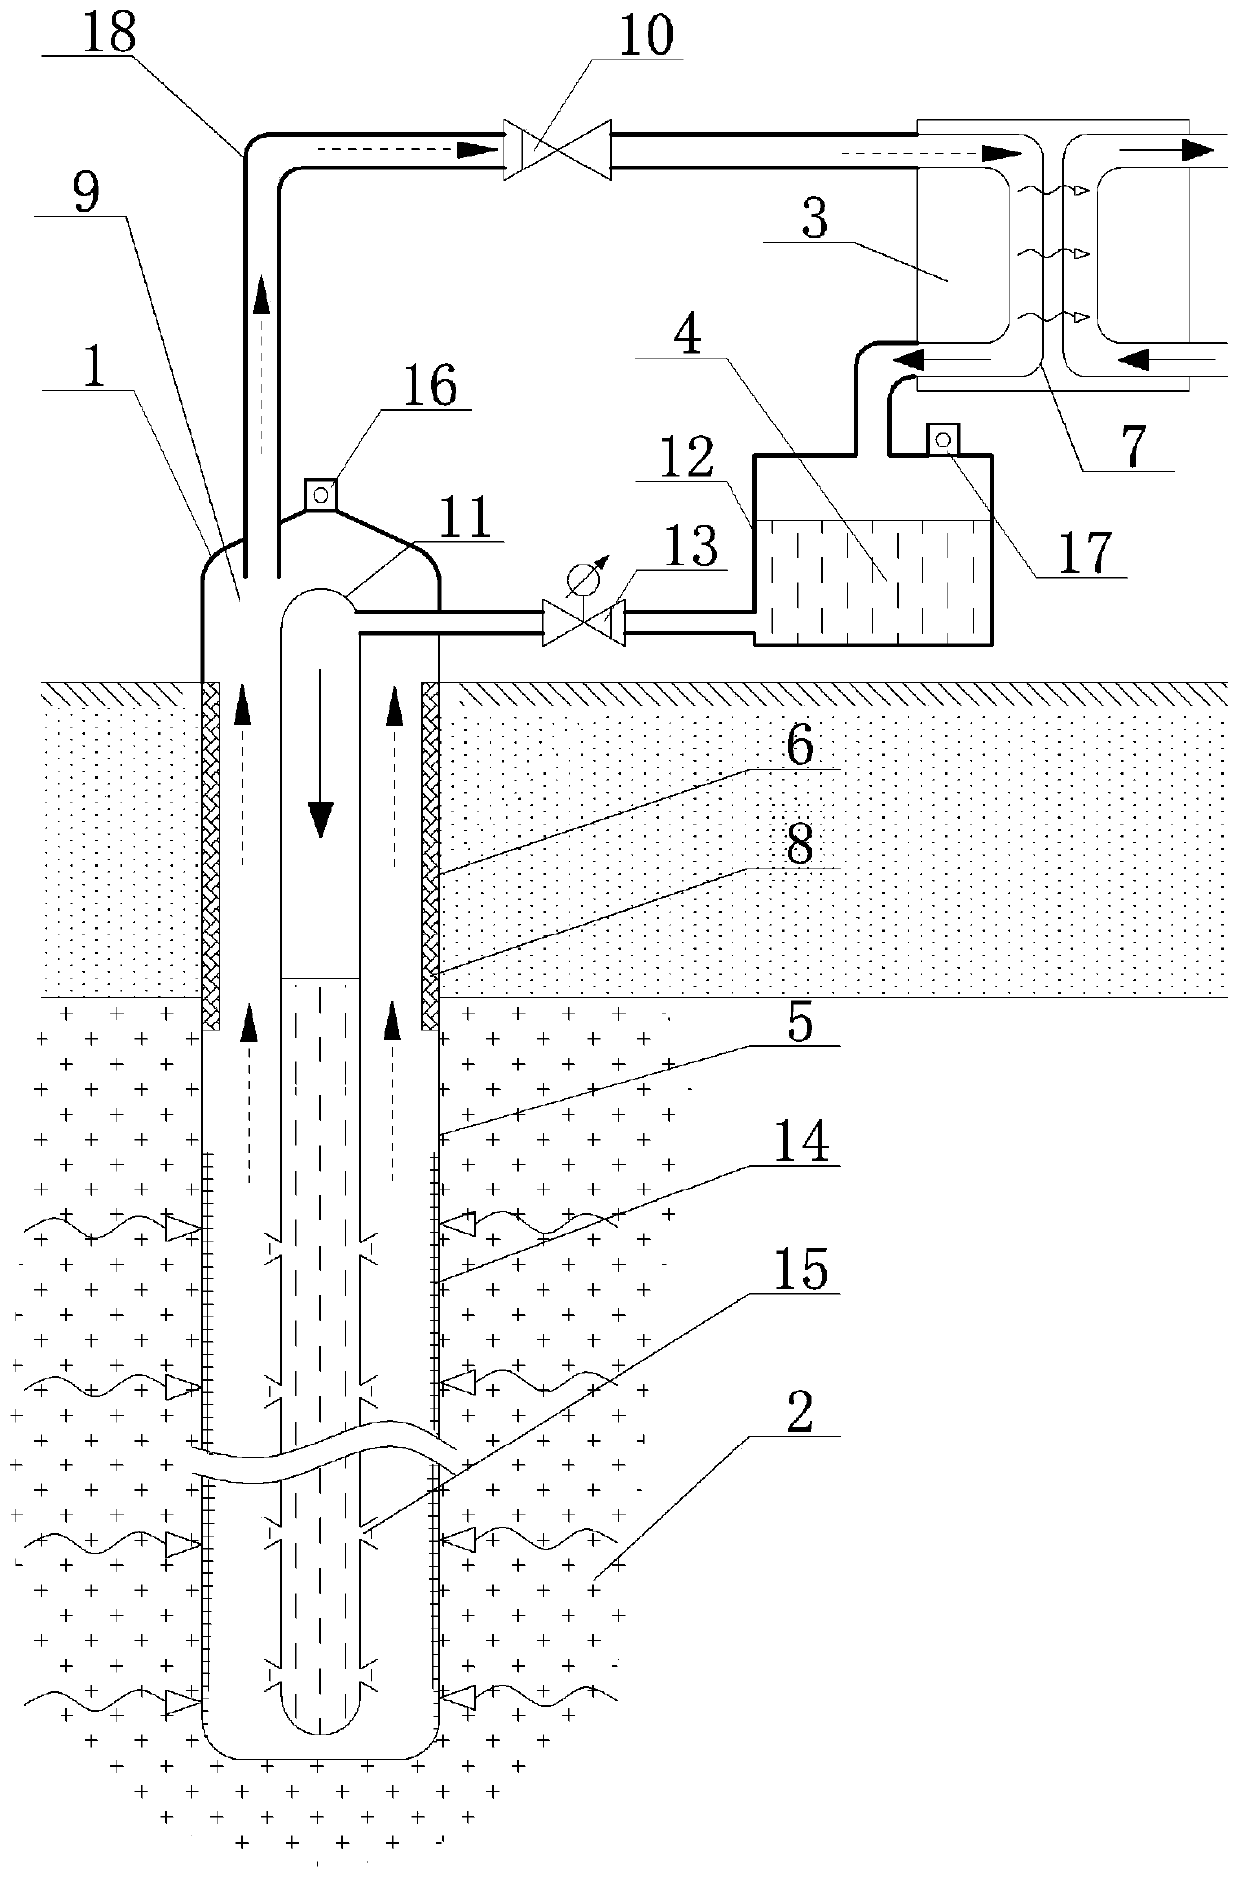 A loop heat pipe geothermal mining system with adjustable working fluid circulation flow